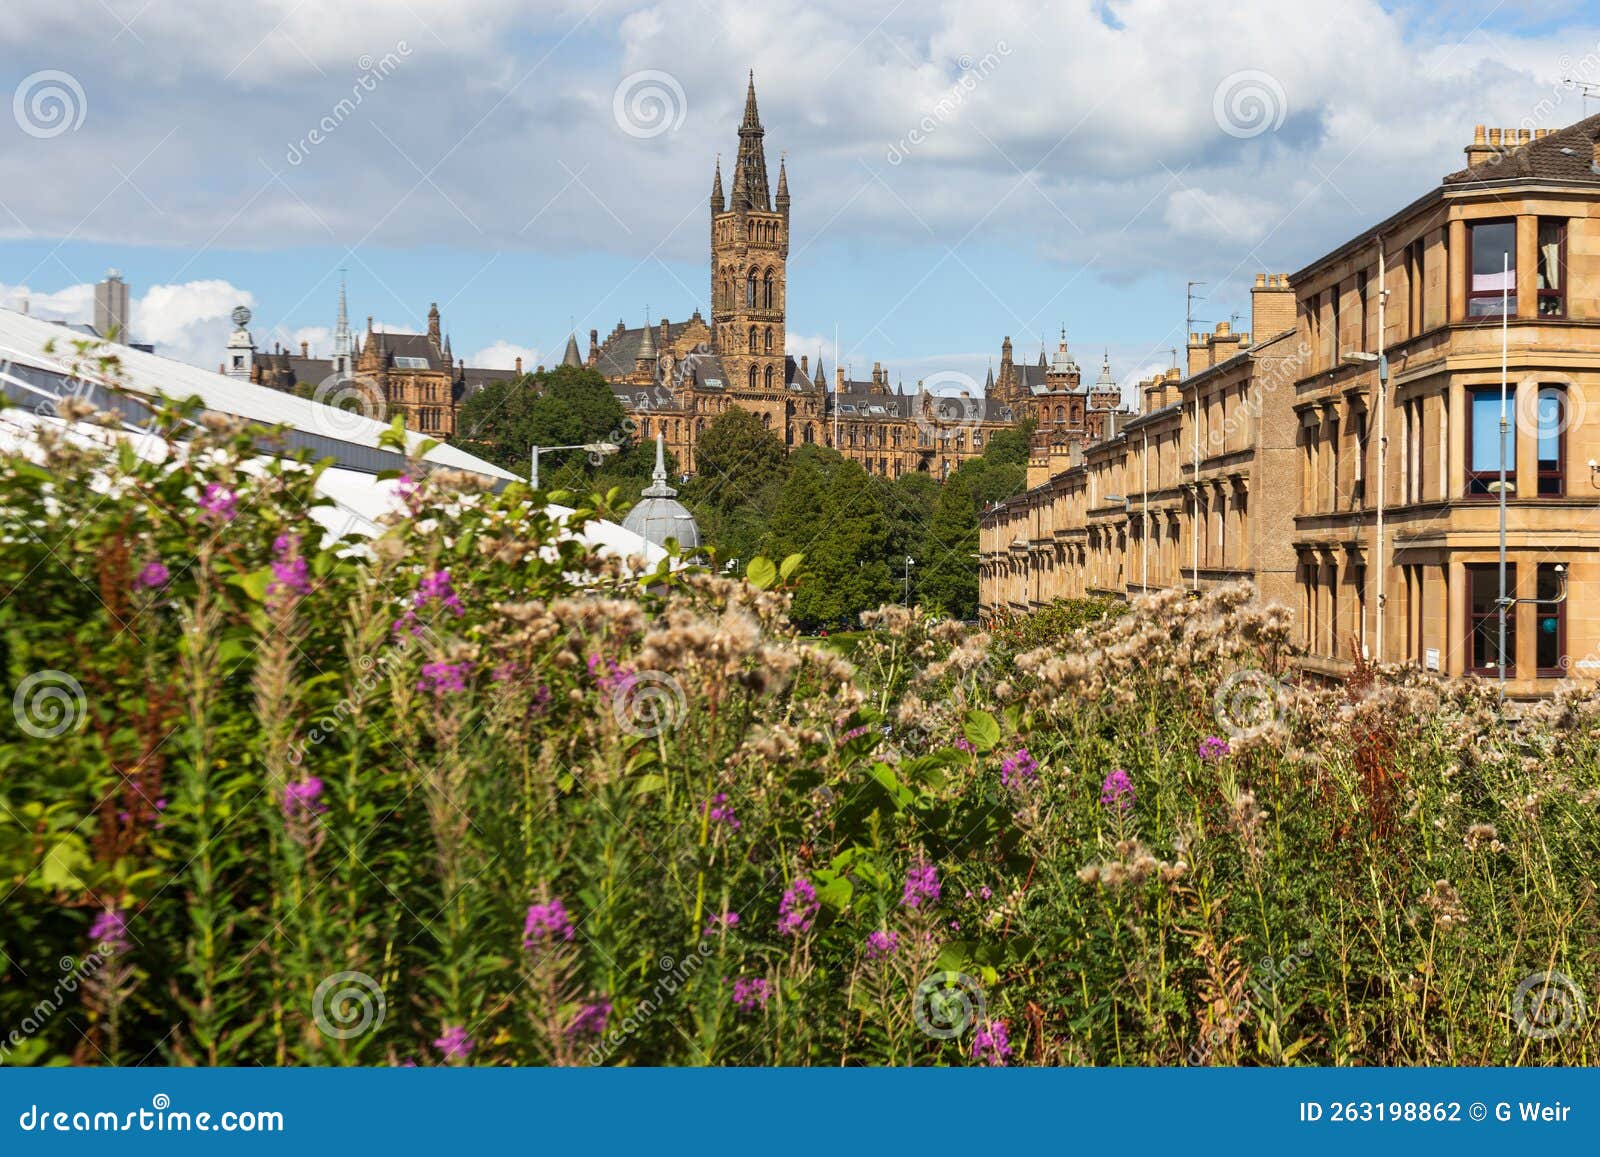 views of glasgow university on a summer's day